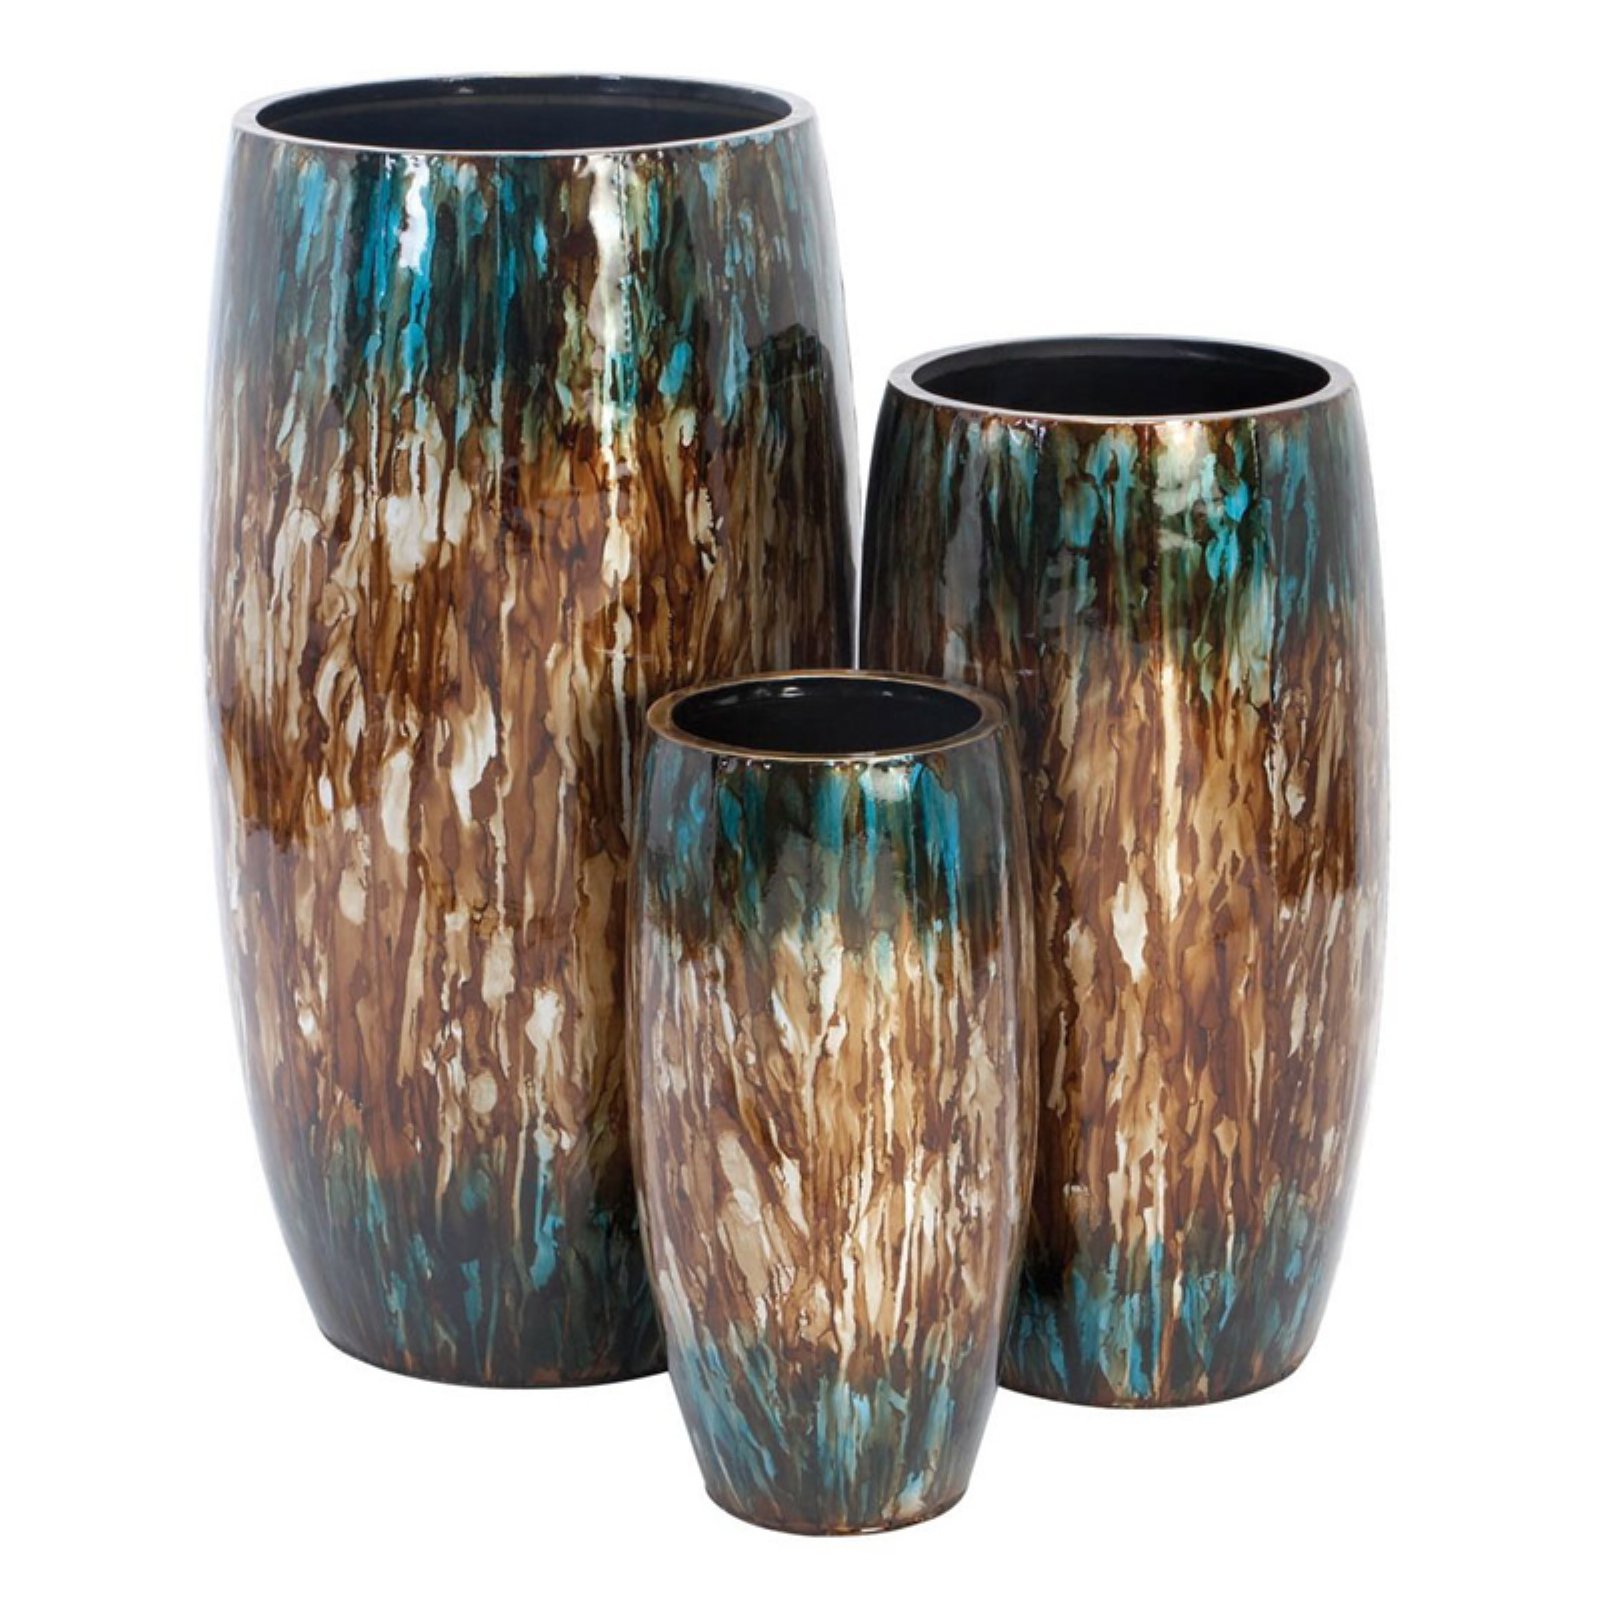 Aspire Home Accents Tall Colorful Metal Planters - Set of 3 - image 1 of 2